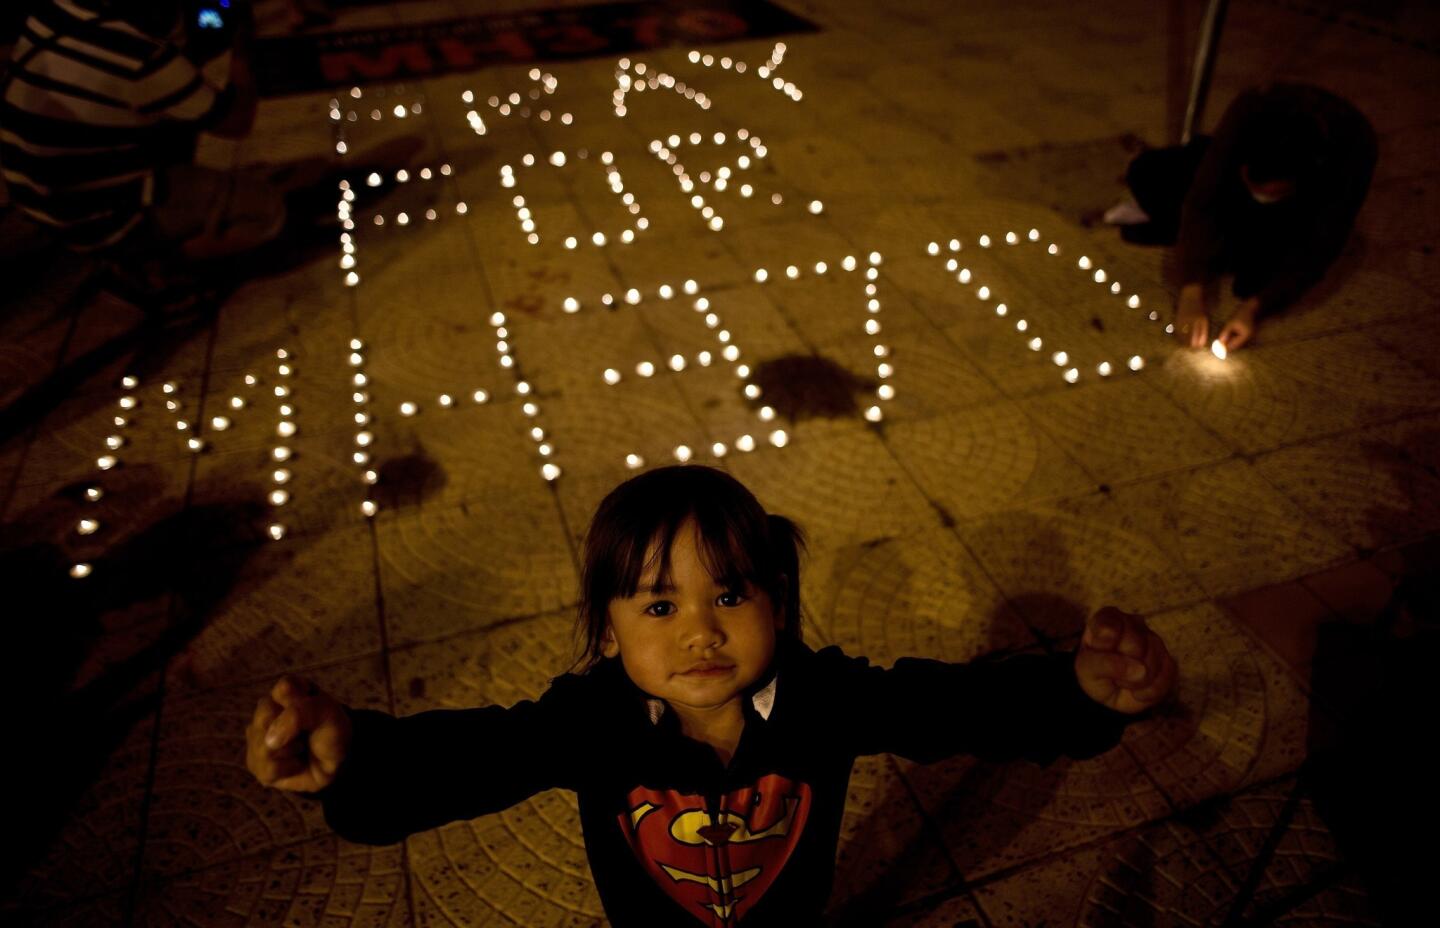 A Malaysian ethnic Chinese child reacts to the camera as others light candles during a vigil for missing Malaysia Airlines passengers at the Independence Square in Kuala Lumpur on March 10, 2014.